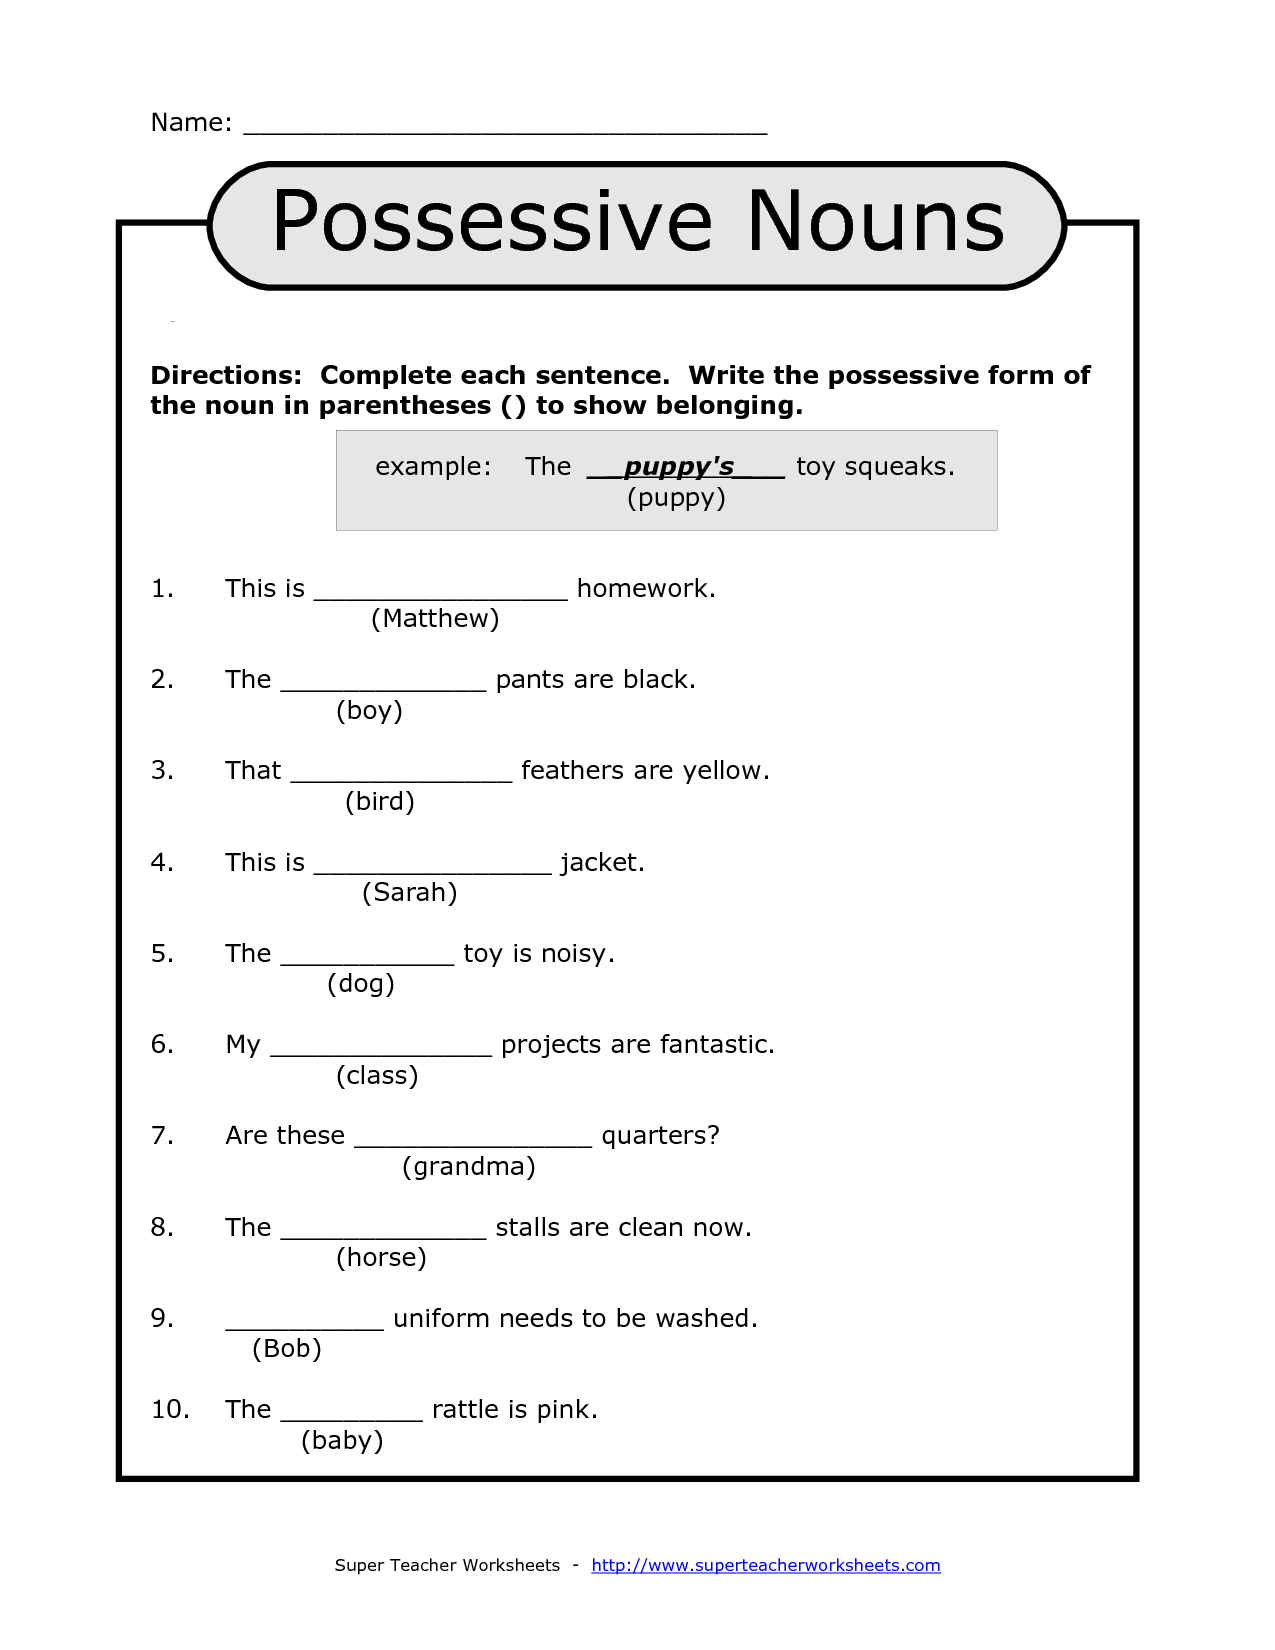 15 best images of free possessive nouns printable